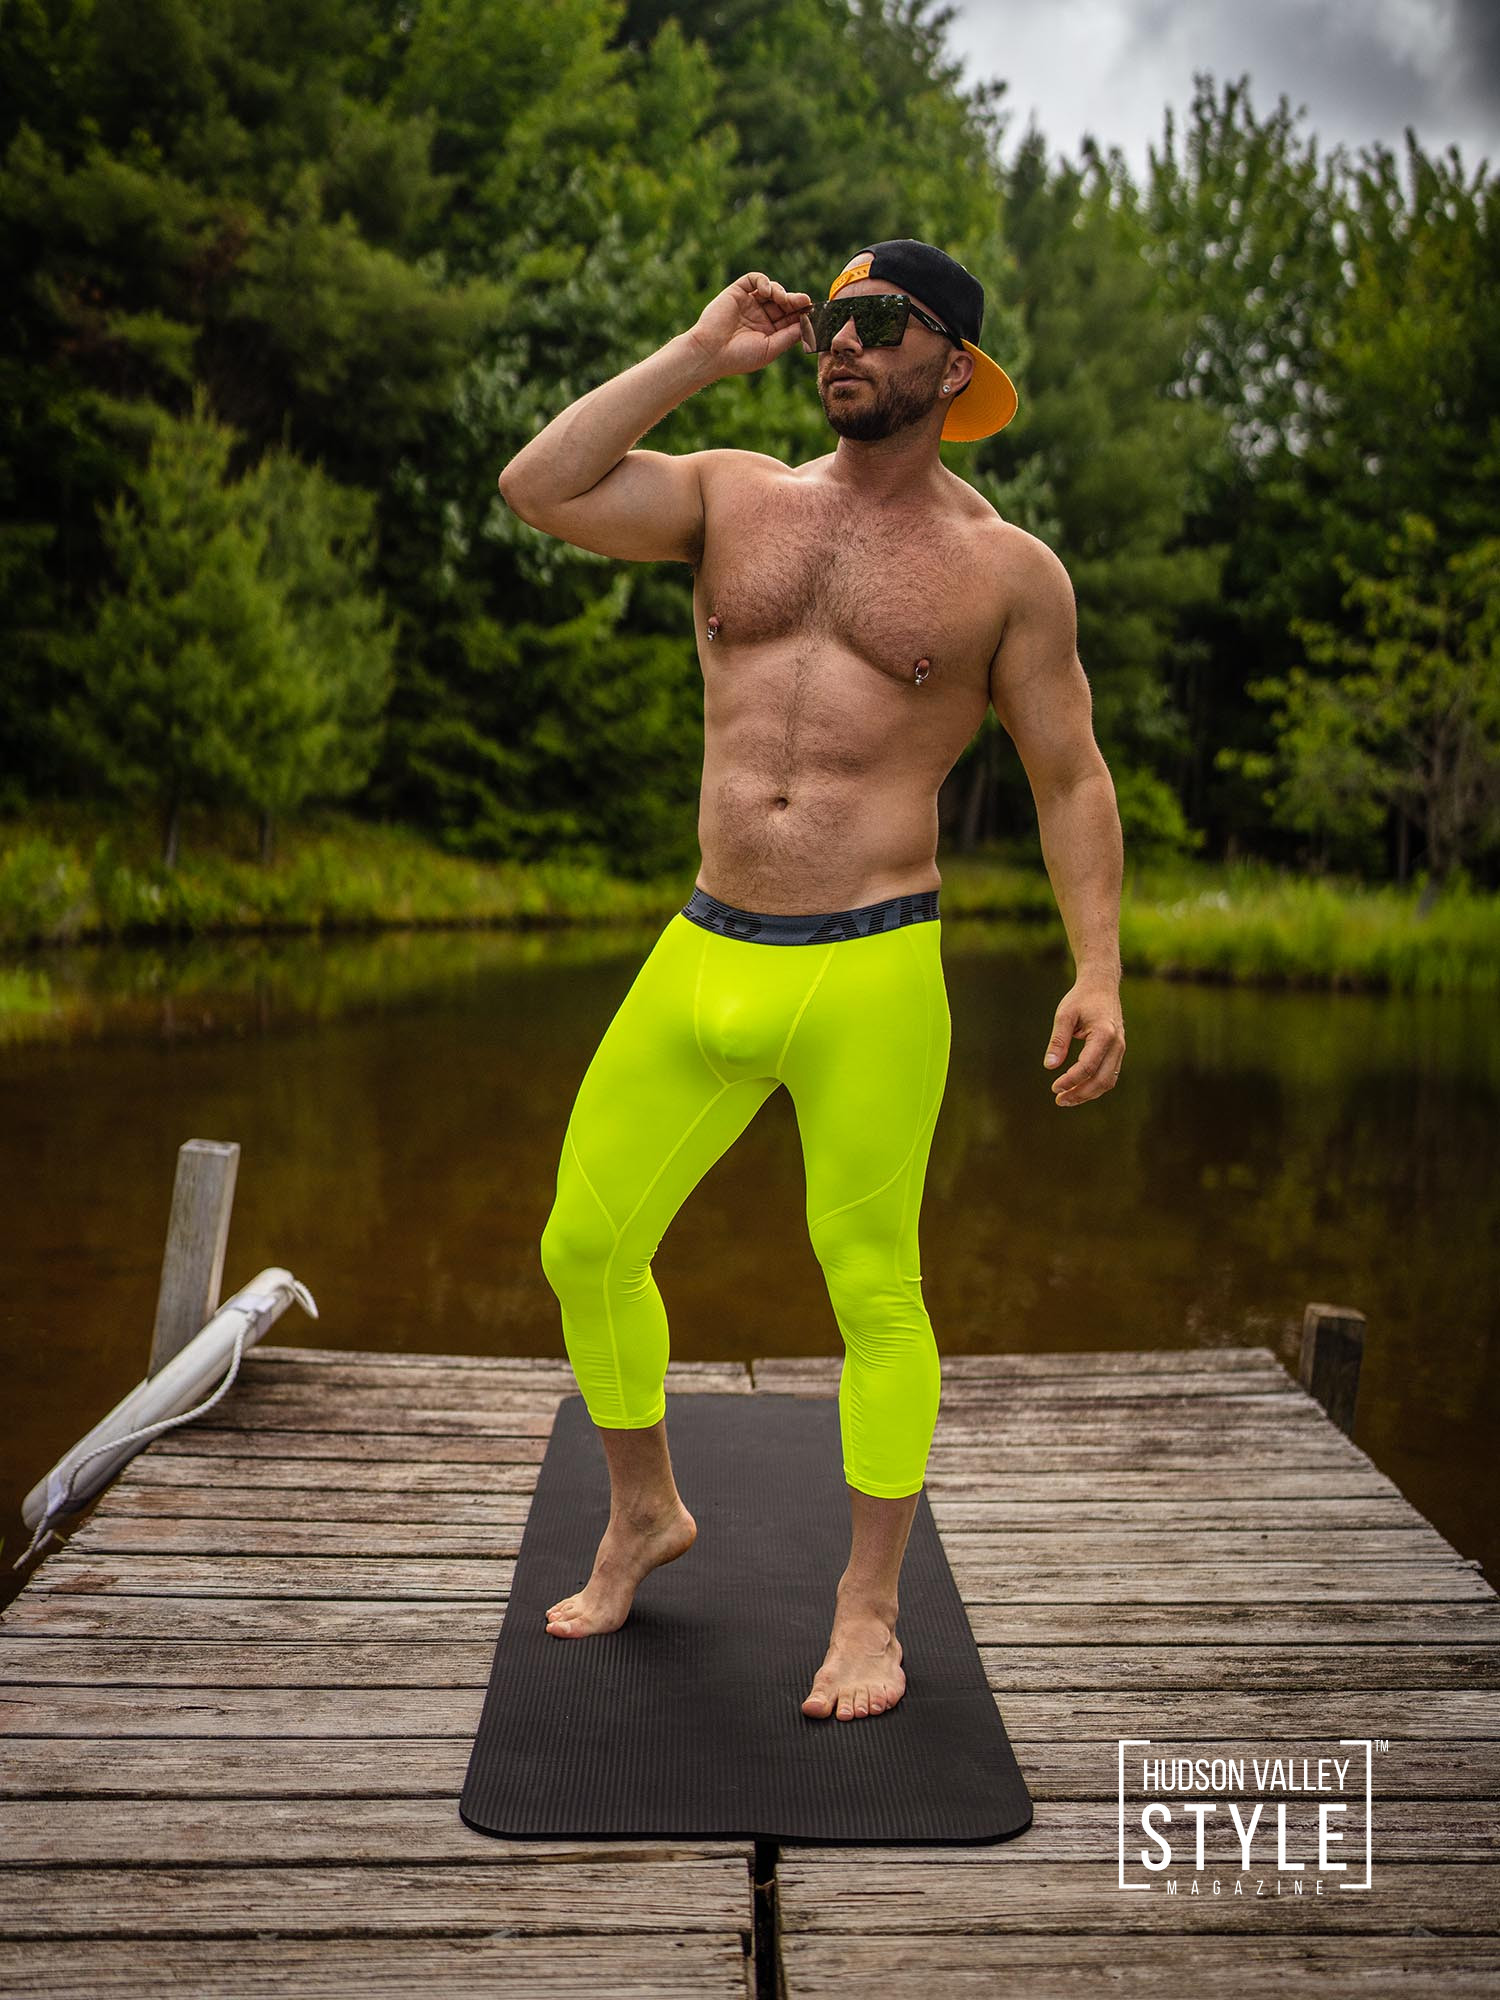 Style, Substance, and Sun Protection: Why ATHLIO Men's Workout Leggings Are a Must-Have – Product Reviews with Fitness Model/Bodybuilding Coach Maxwell Alexander